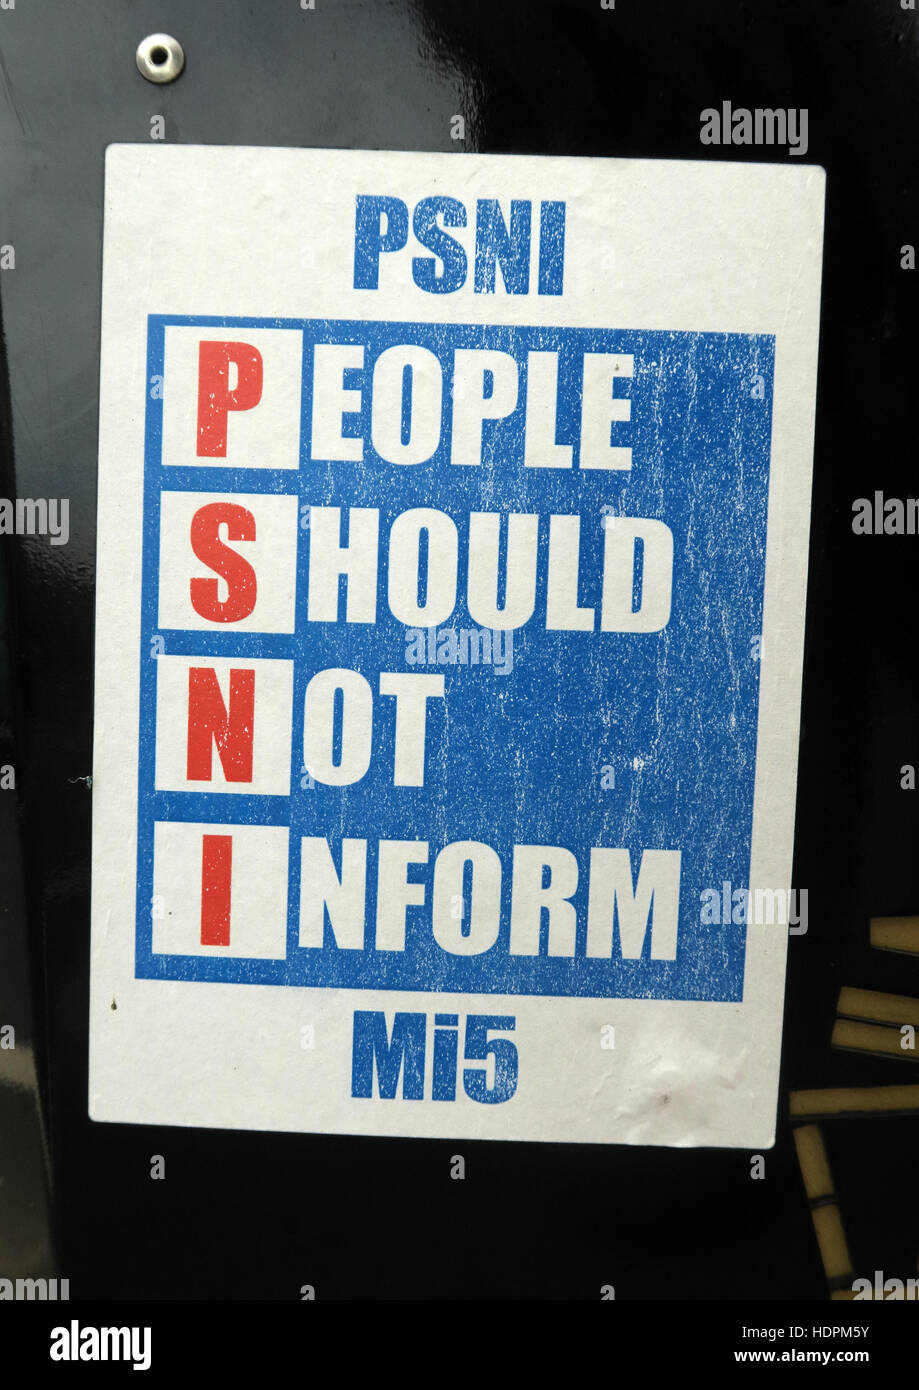 Belfast Falls Rd Republican sign, PSNI, Police Service Northern Ireland, People should Not Inform. Not Welcome In This area,Mi5 Stock Photo